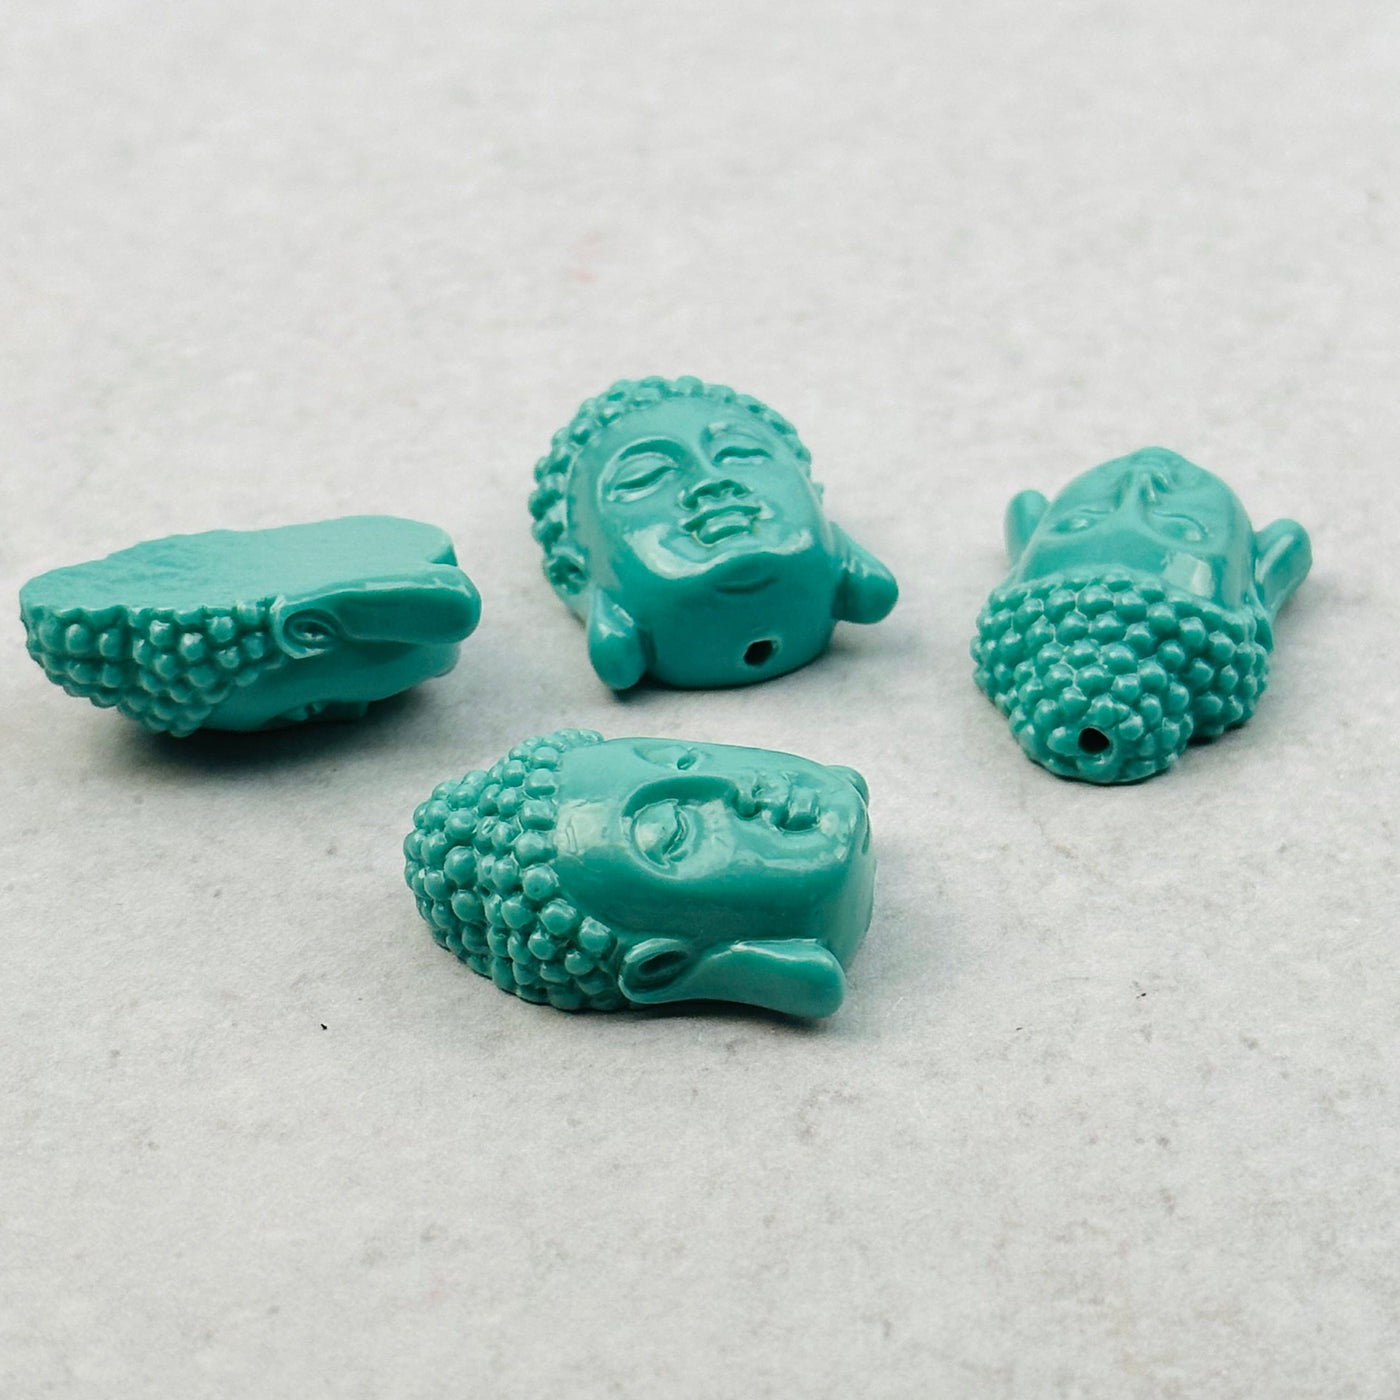 Turquoise Magnesite Buddha Beads from different angles